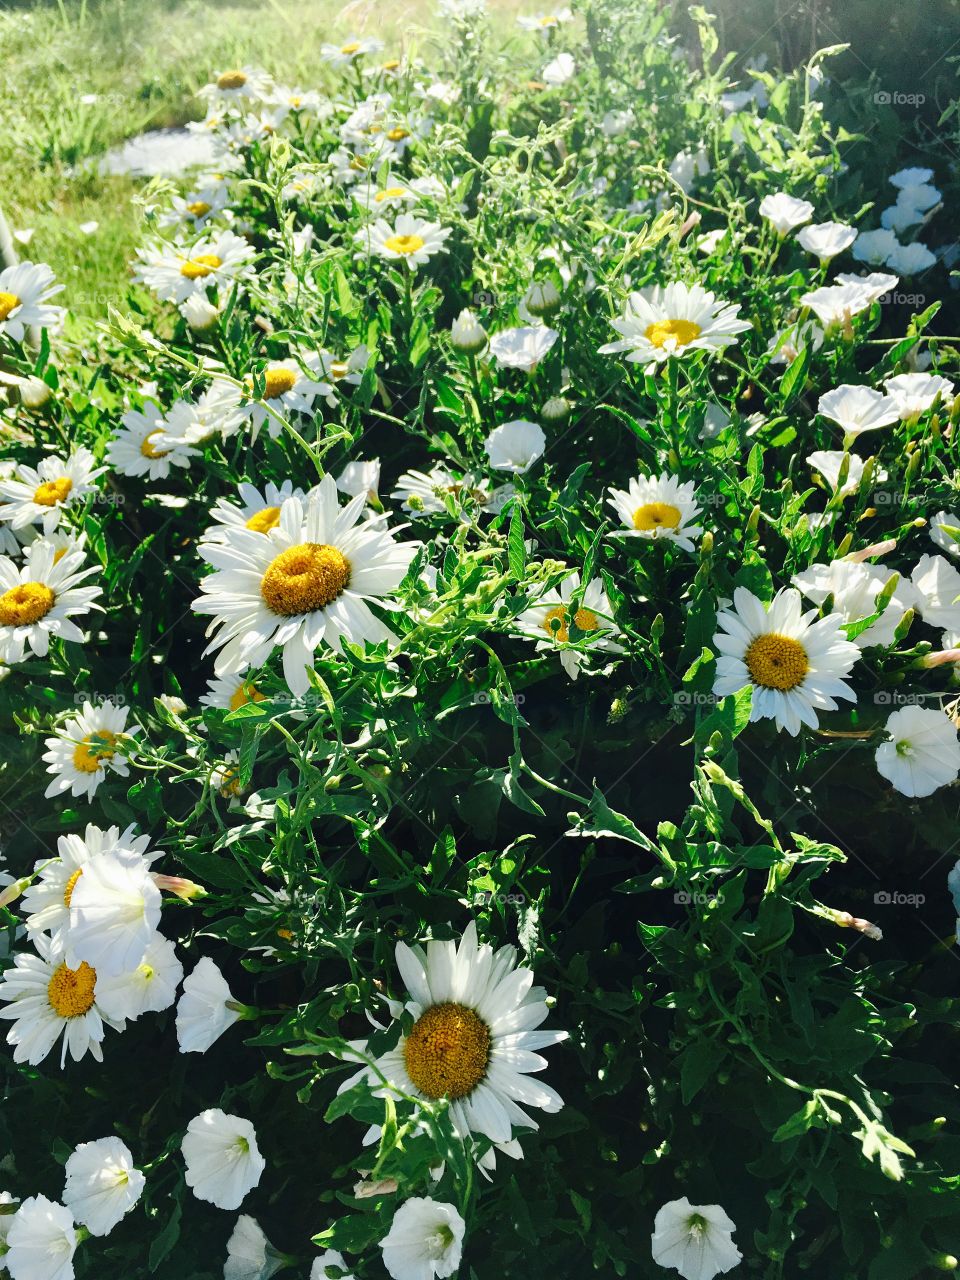 Happy Happy daisies! The sunshine flower. Pretty yellow and white. Bloom. Blossom. Grow.